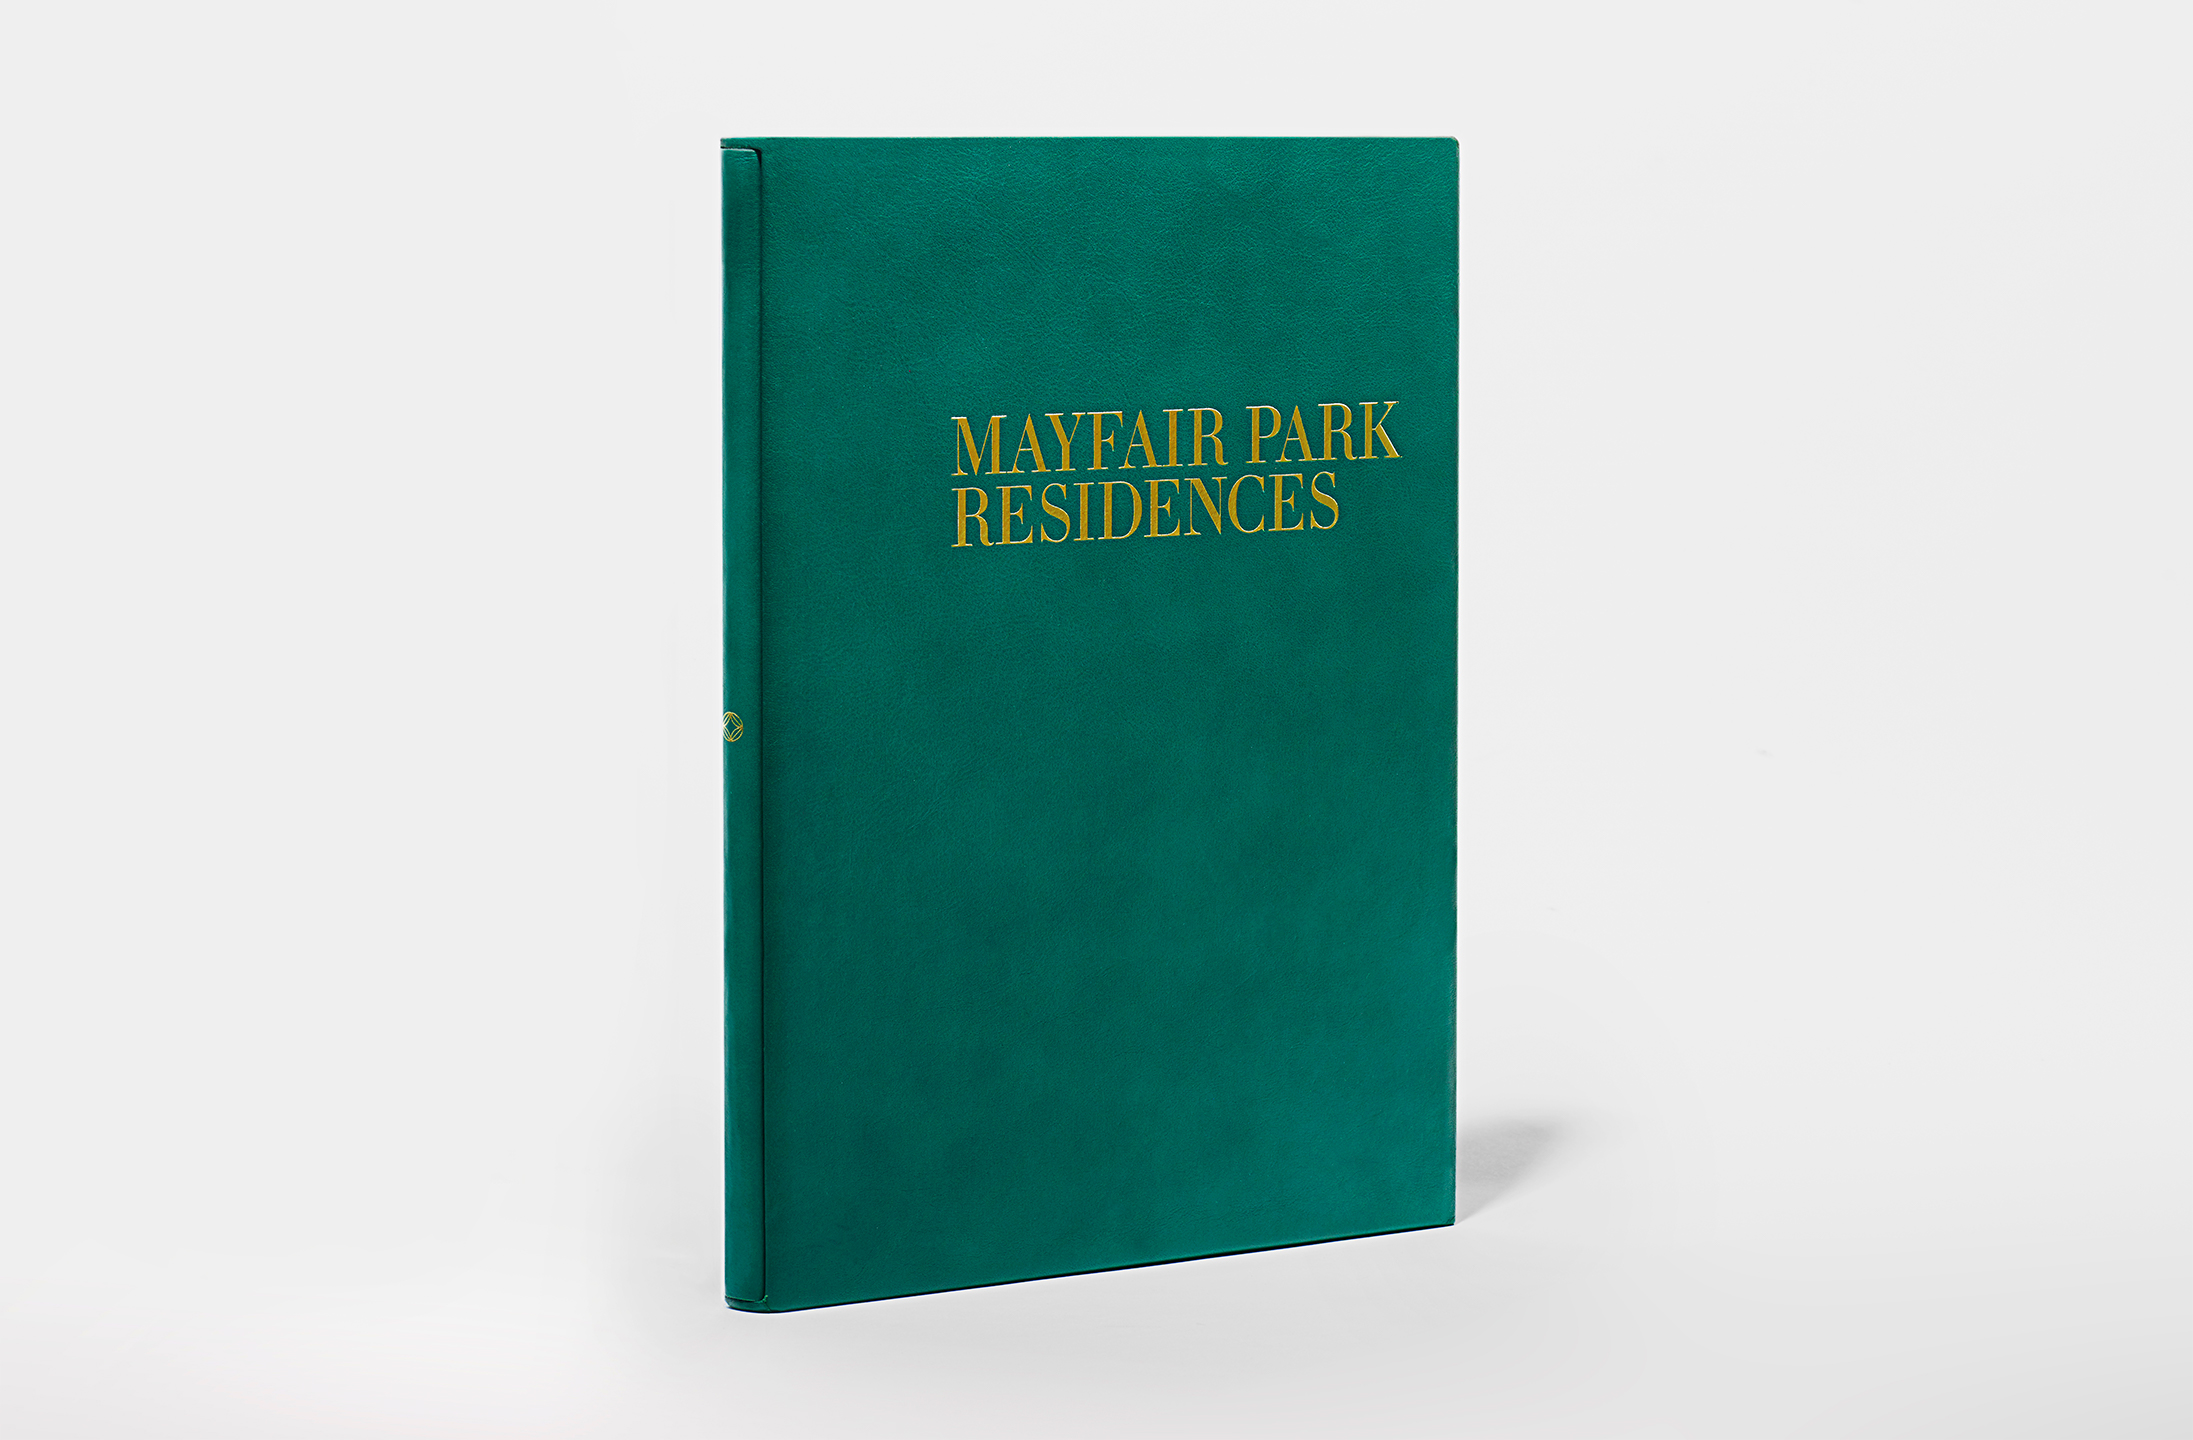 Identity and brand book for Mayfair Park Residences